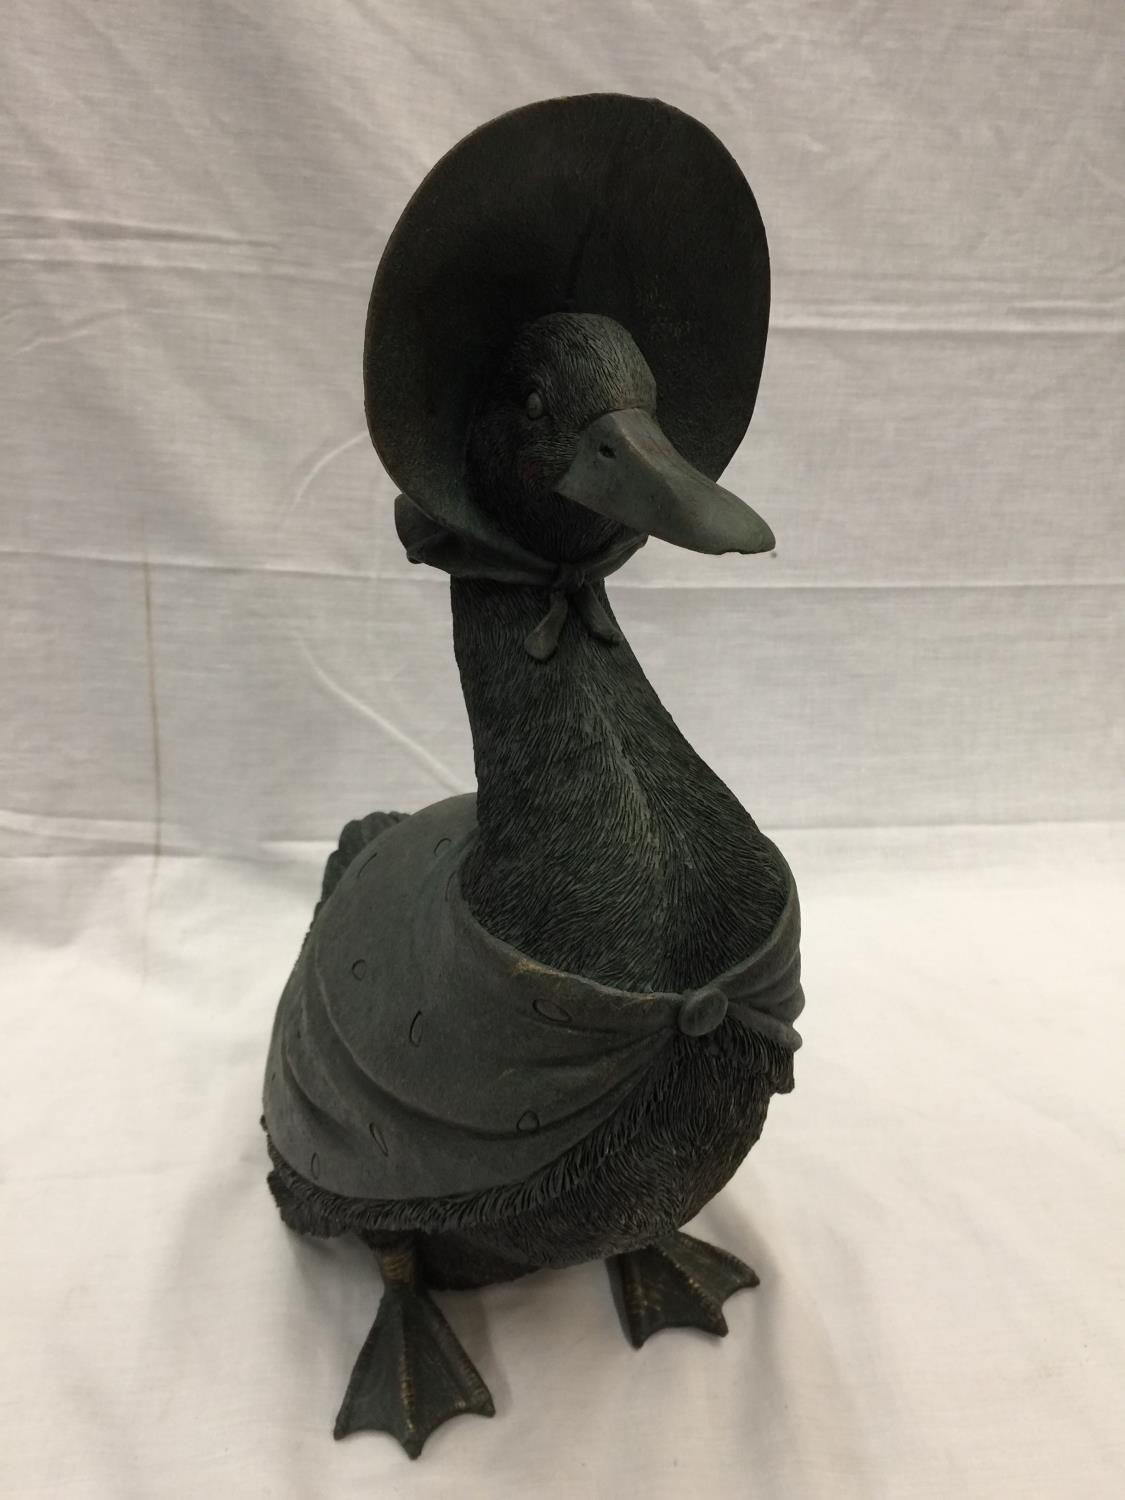 A GEMIMA PUDDLE DUCK GARDEN ORNAMENT H: 44CM - Image 2 of 3